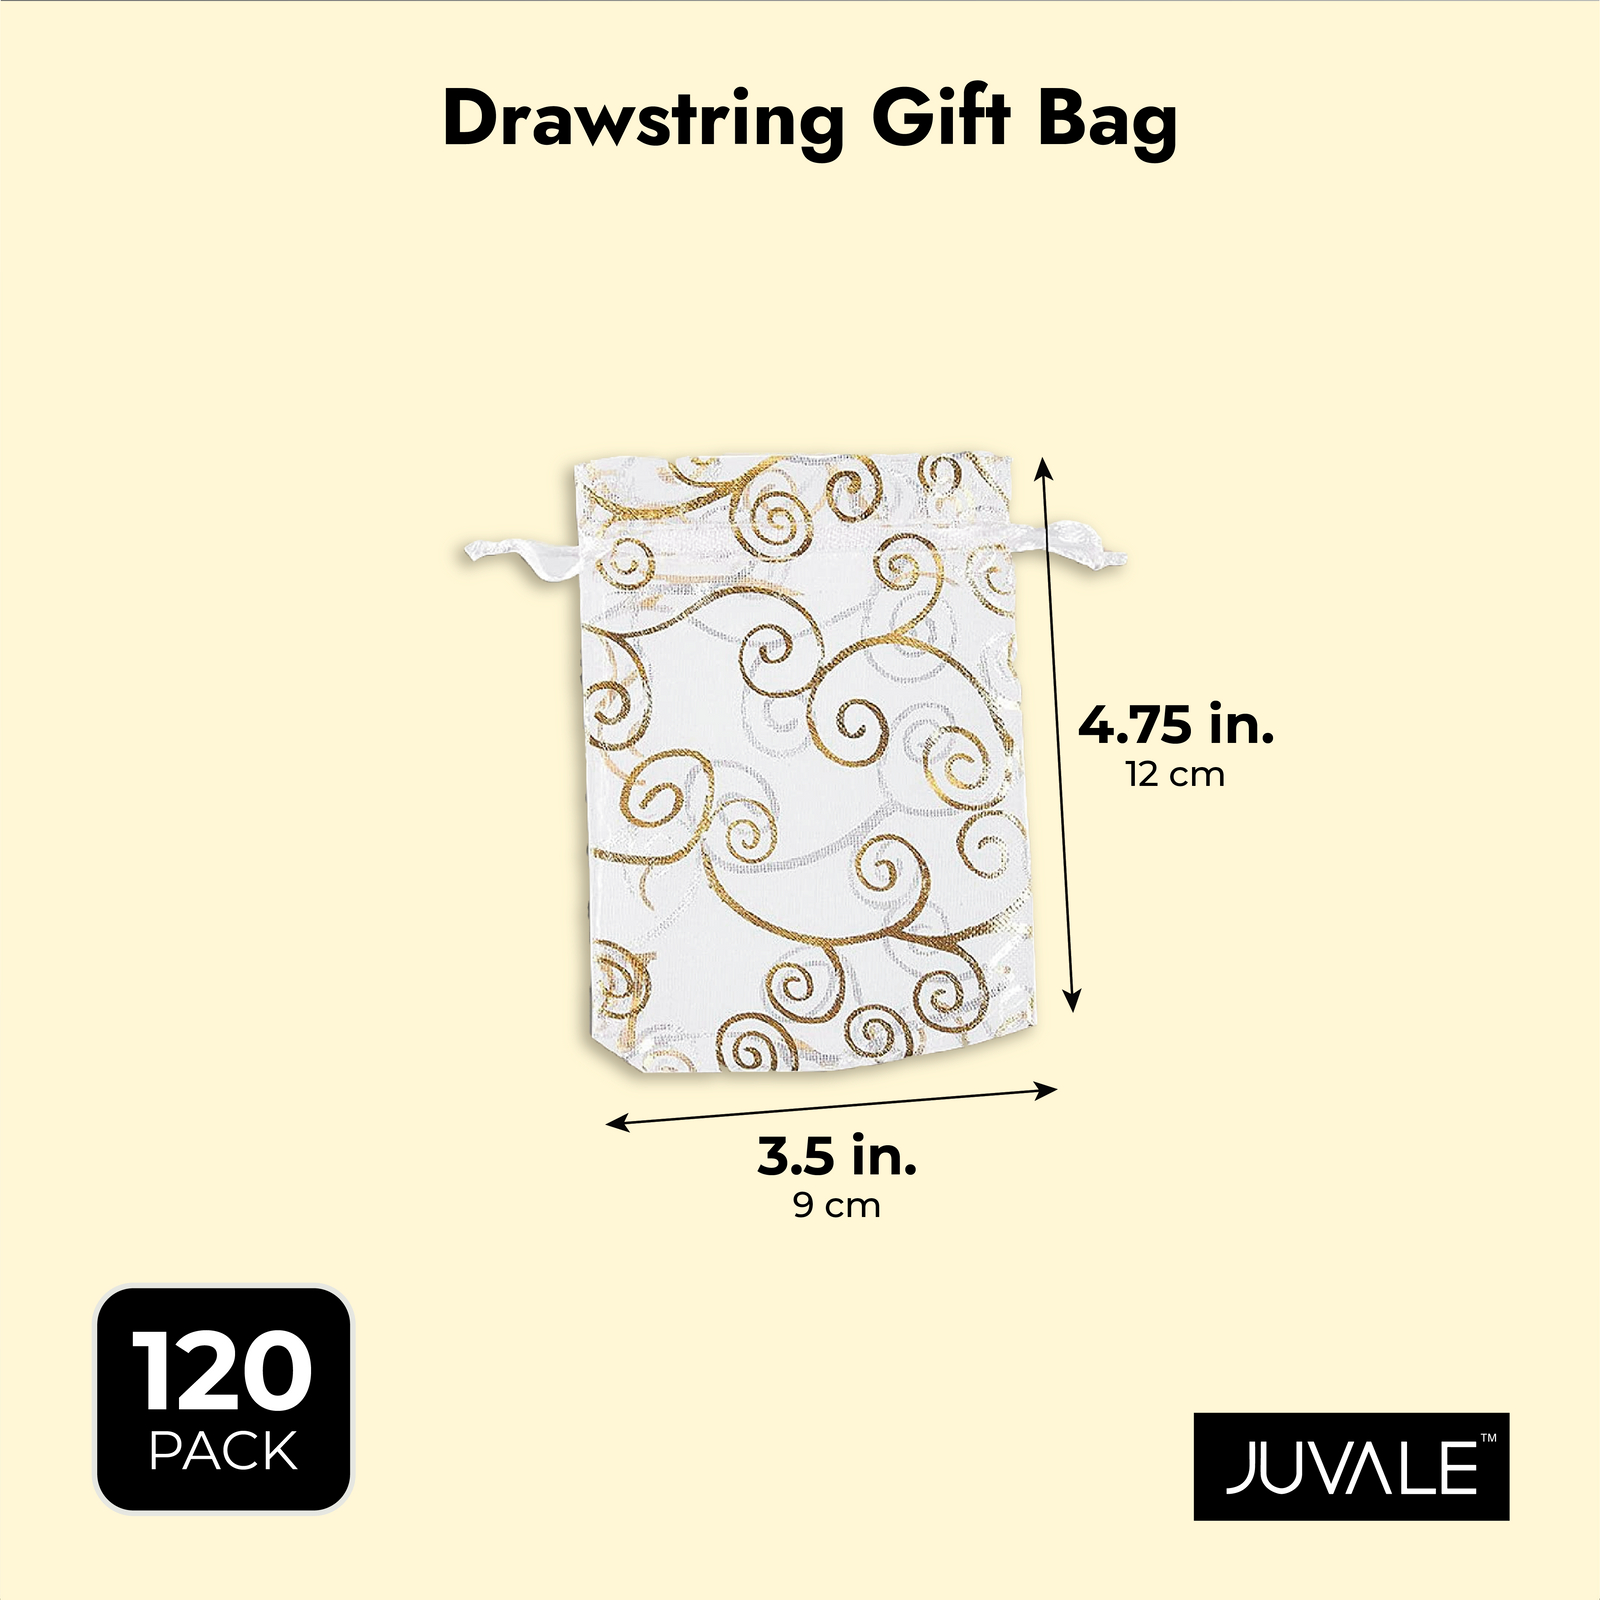 Organza Bags - 120-Count Satin Drawstring Organza Pouches with Gold Swirl Design, Mesh Favor Bags for Baby Showers, Wedding Gifts, Special Occasions, Party Favors, 3.5 x 4.75 inches - image 3 of 5